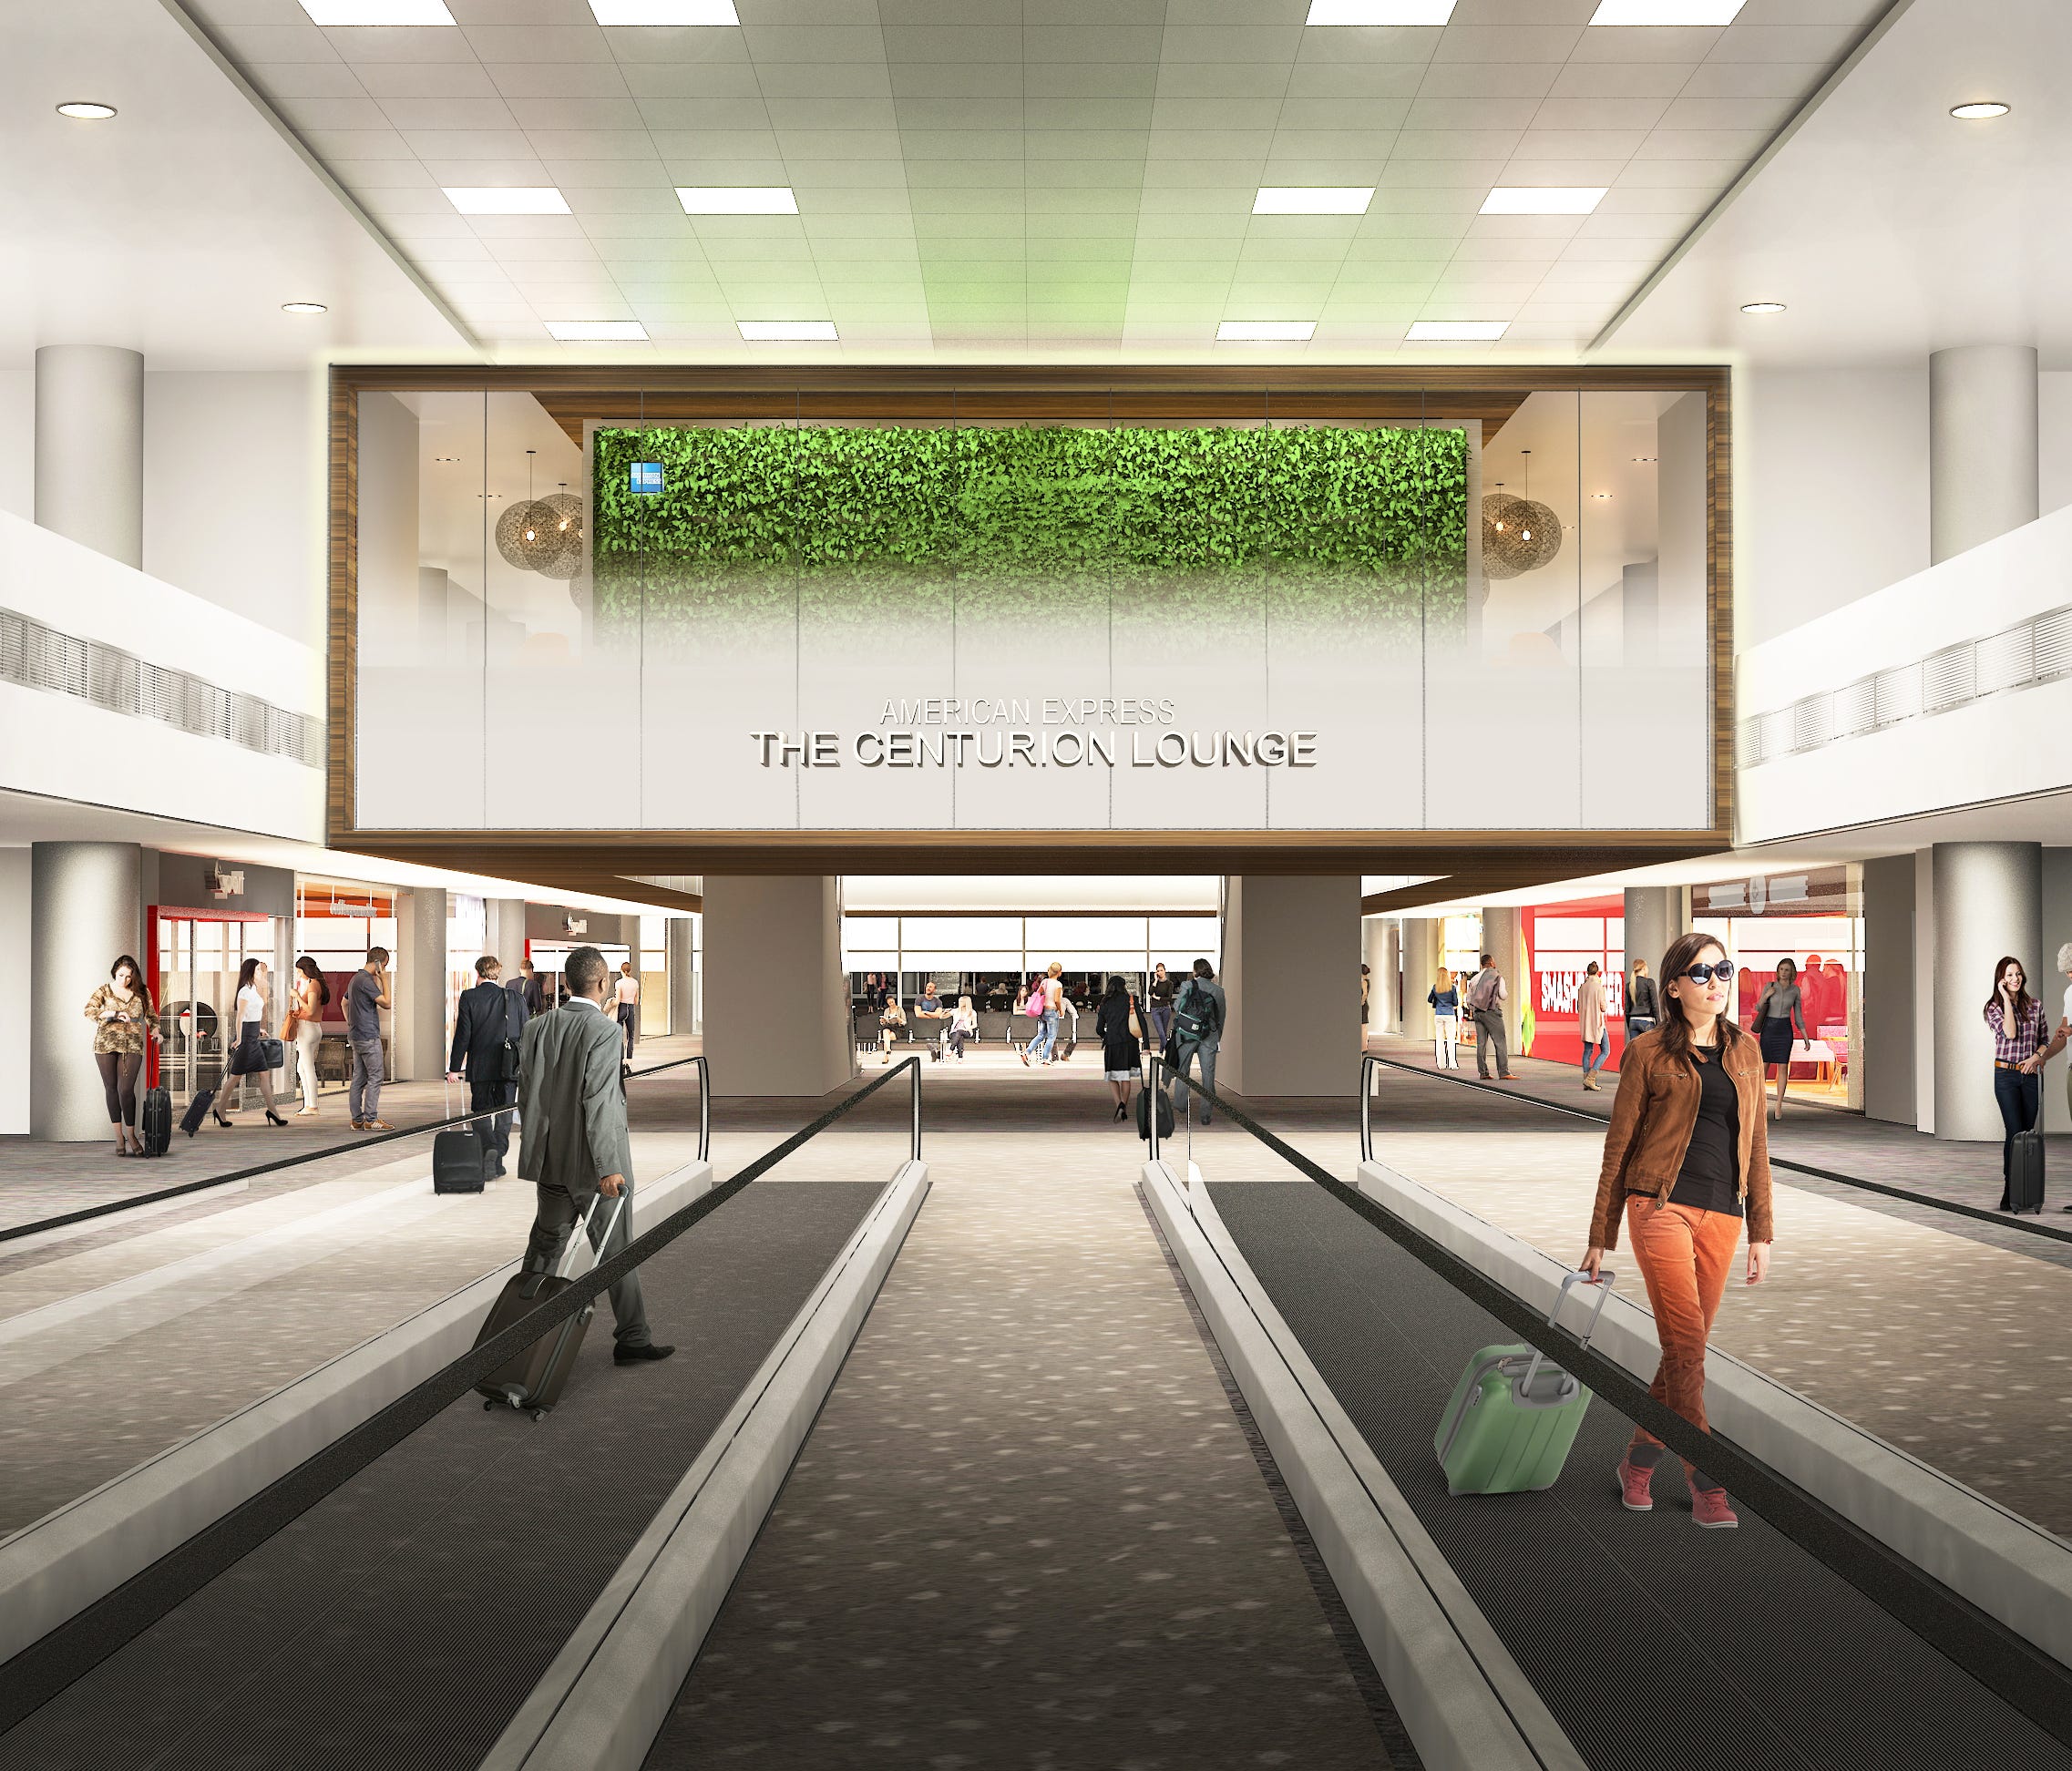 This rendering provided by American Express shows what its new Centurion Lounge planned for the Denver airport might look like from ground level.